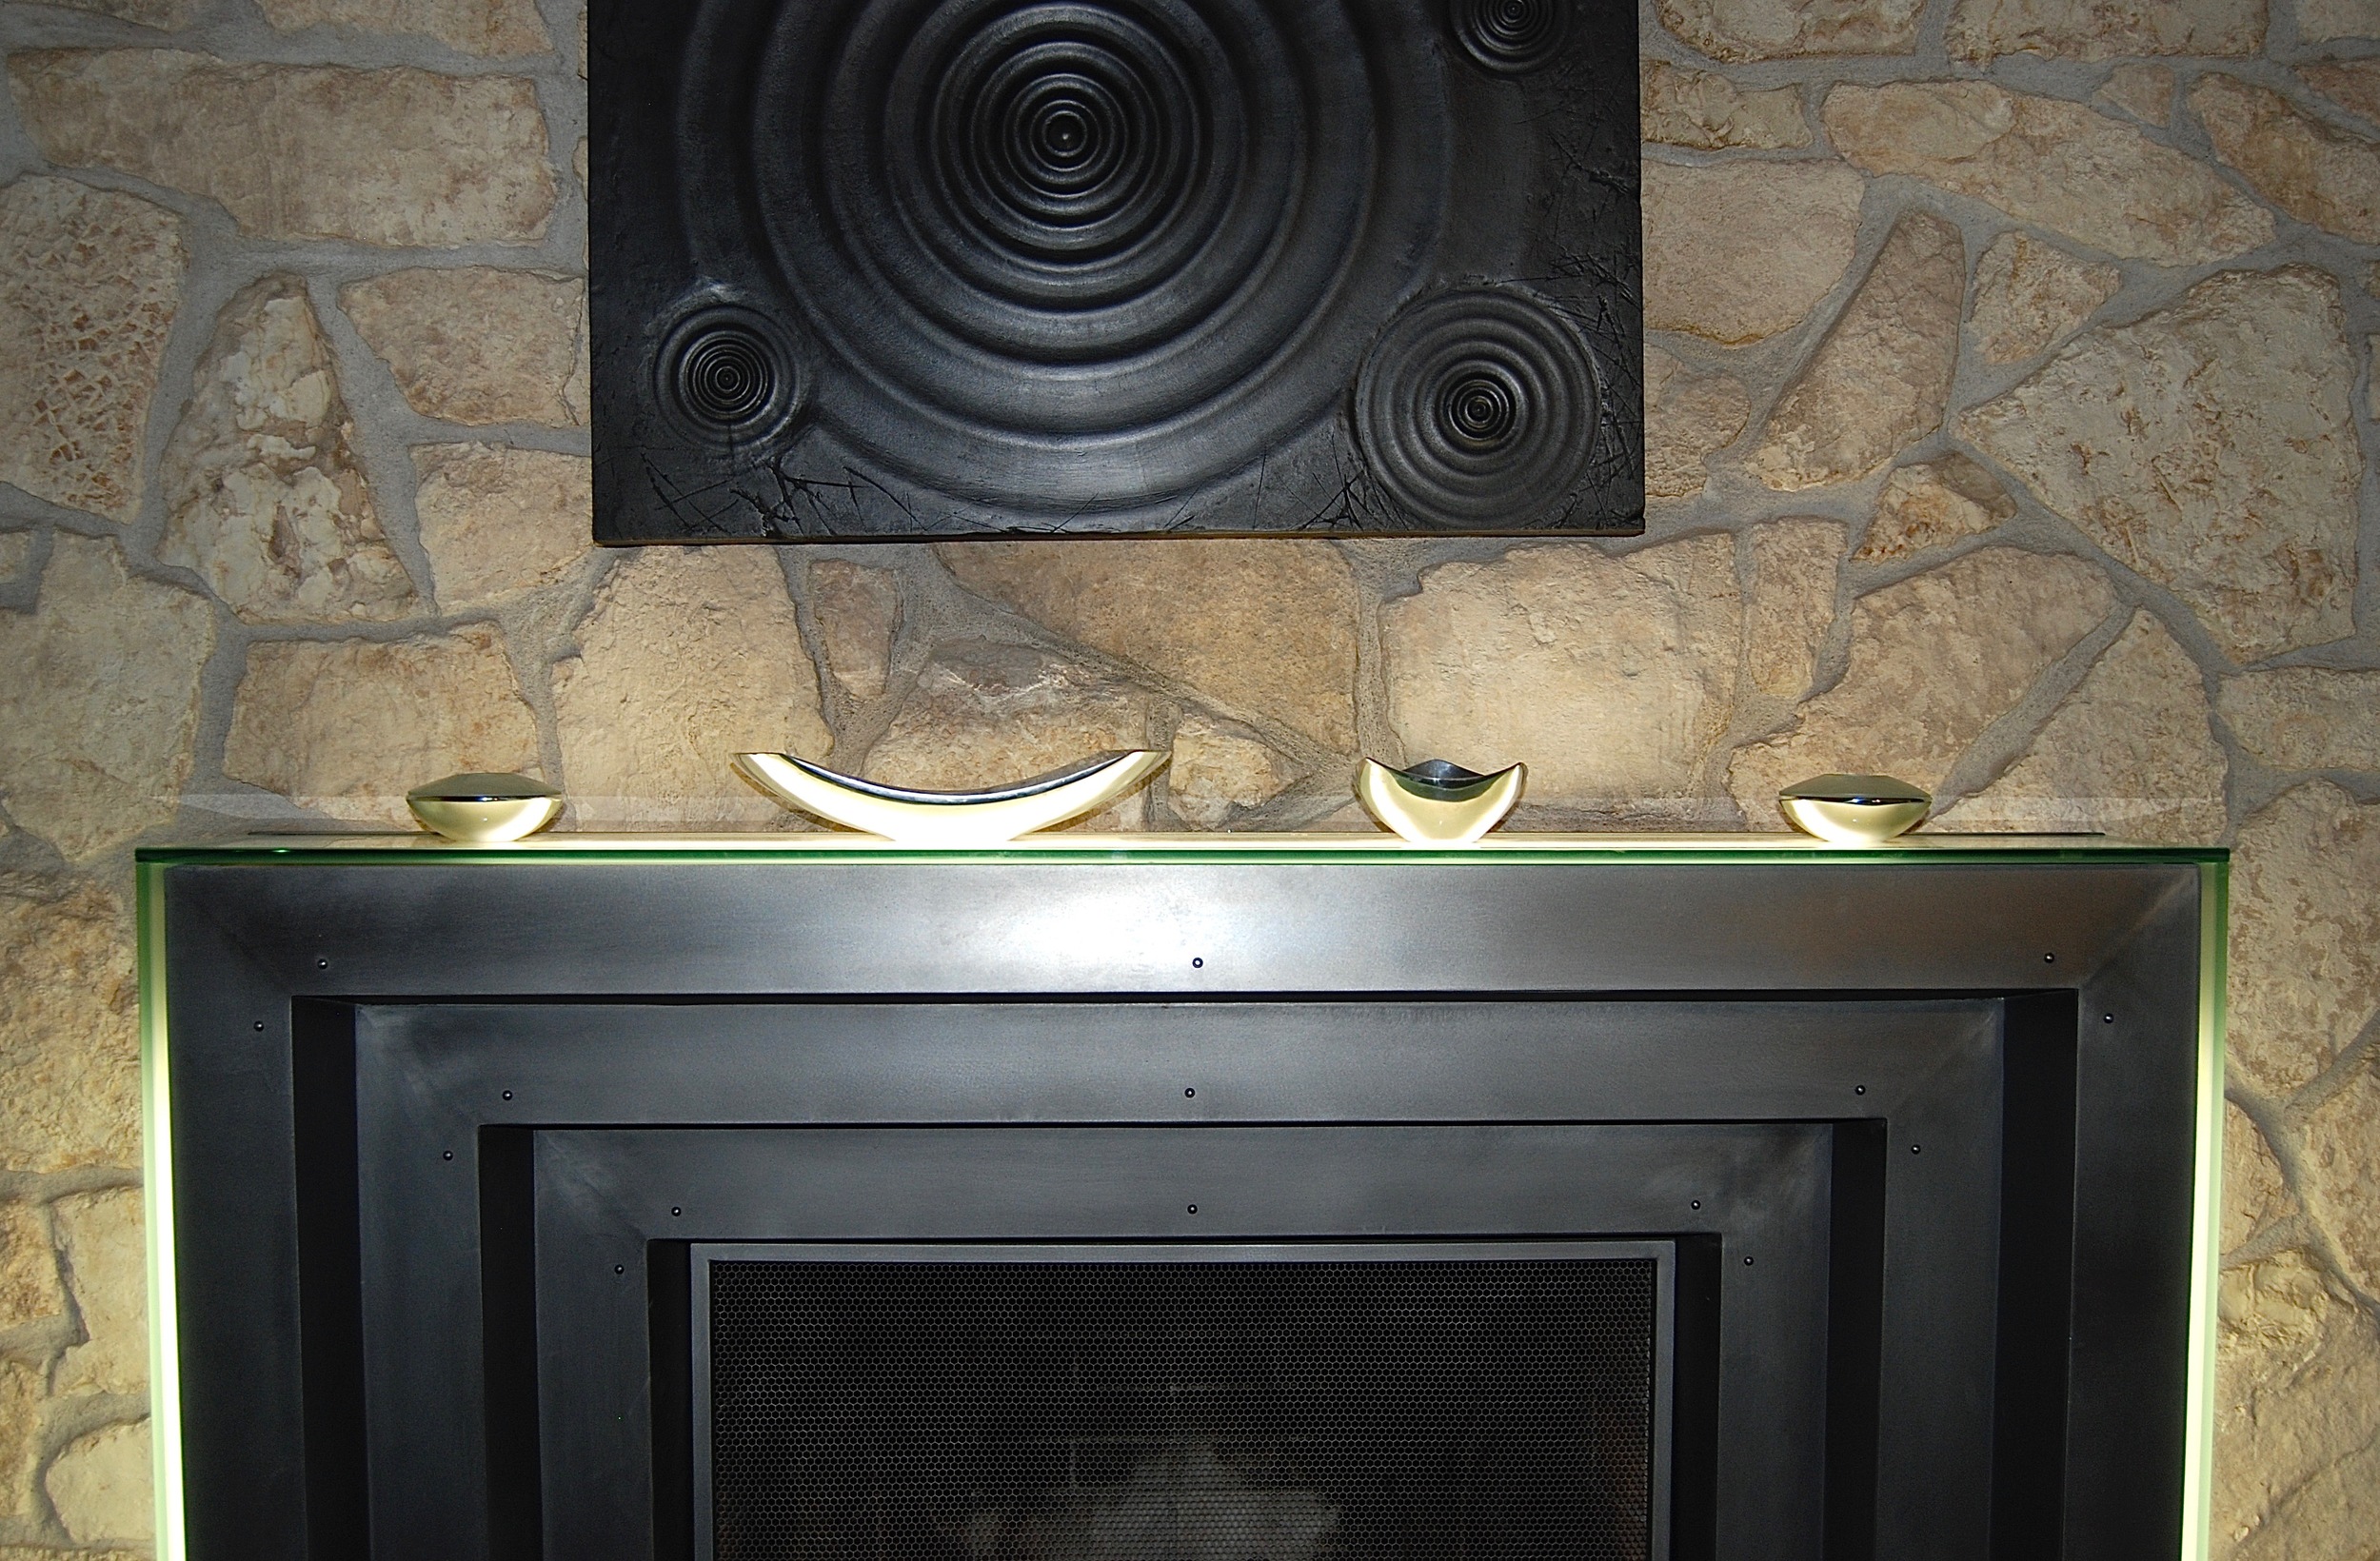 Coffin & King Custom Furniture/ Interiors - Brushed Steel Lighted Fireplace Mantel (detail)